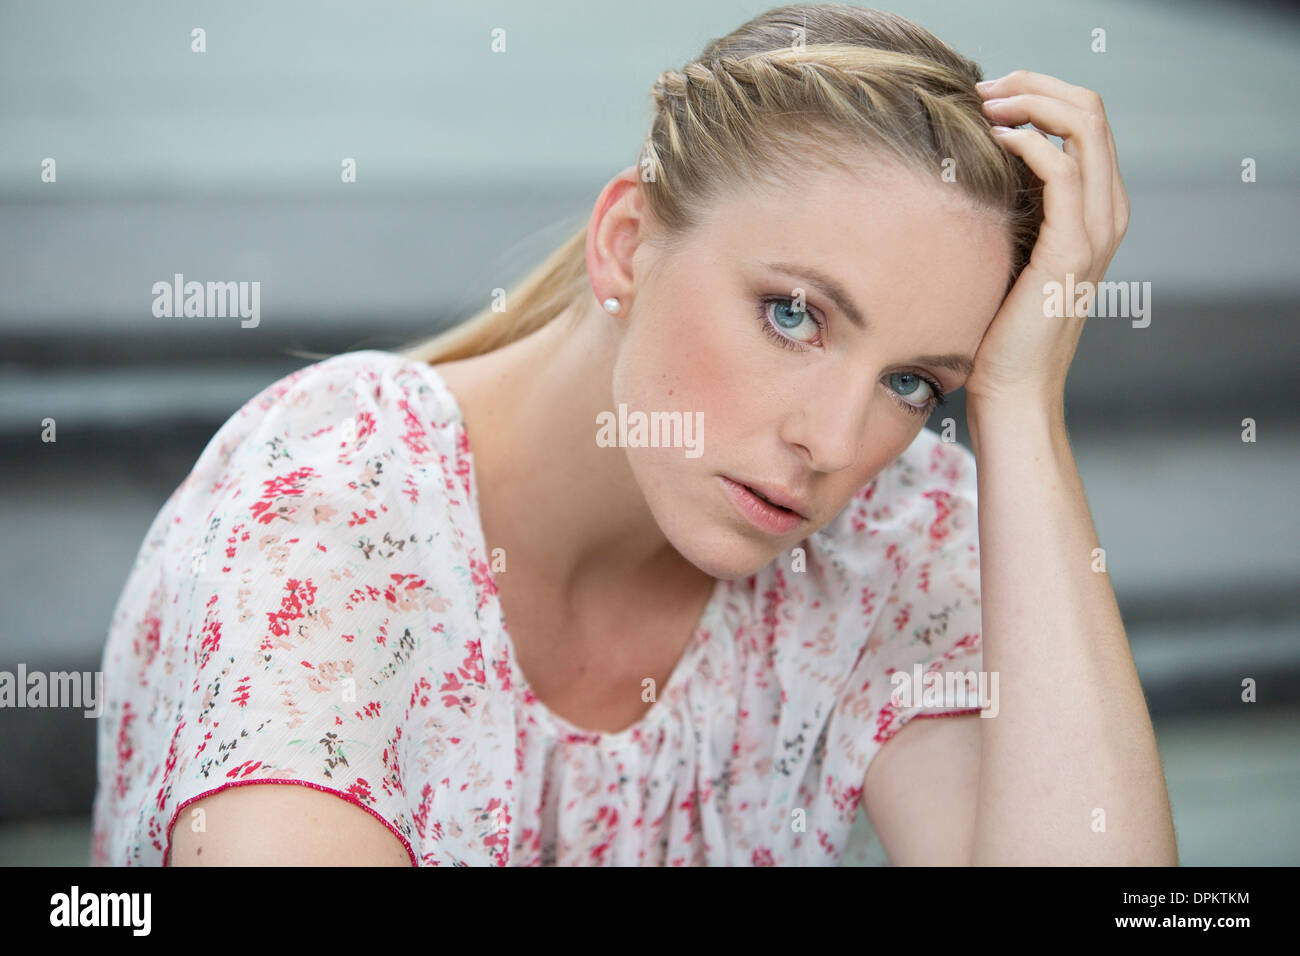 Portrait of young woman sitting on stairs Stock Photo